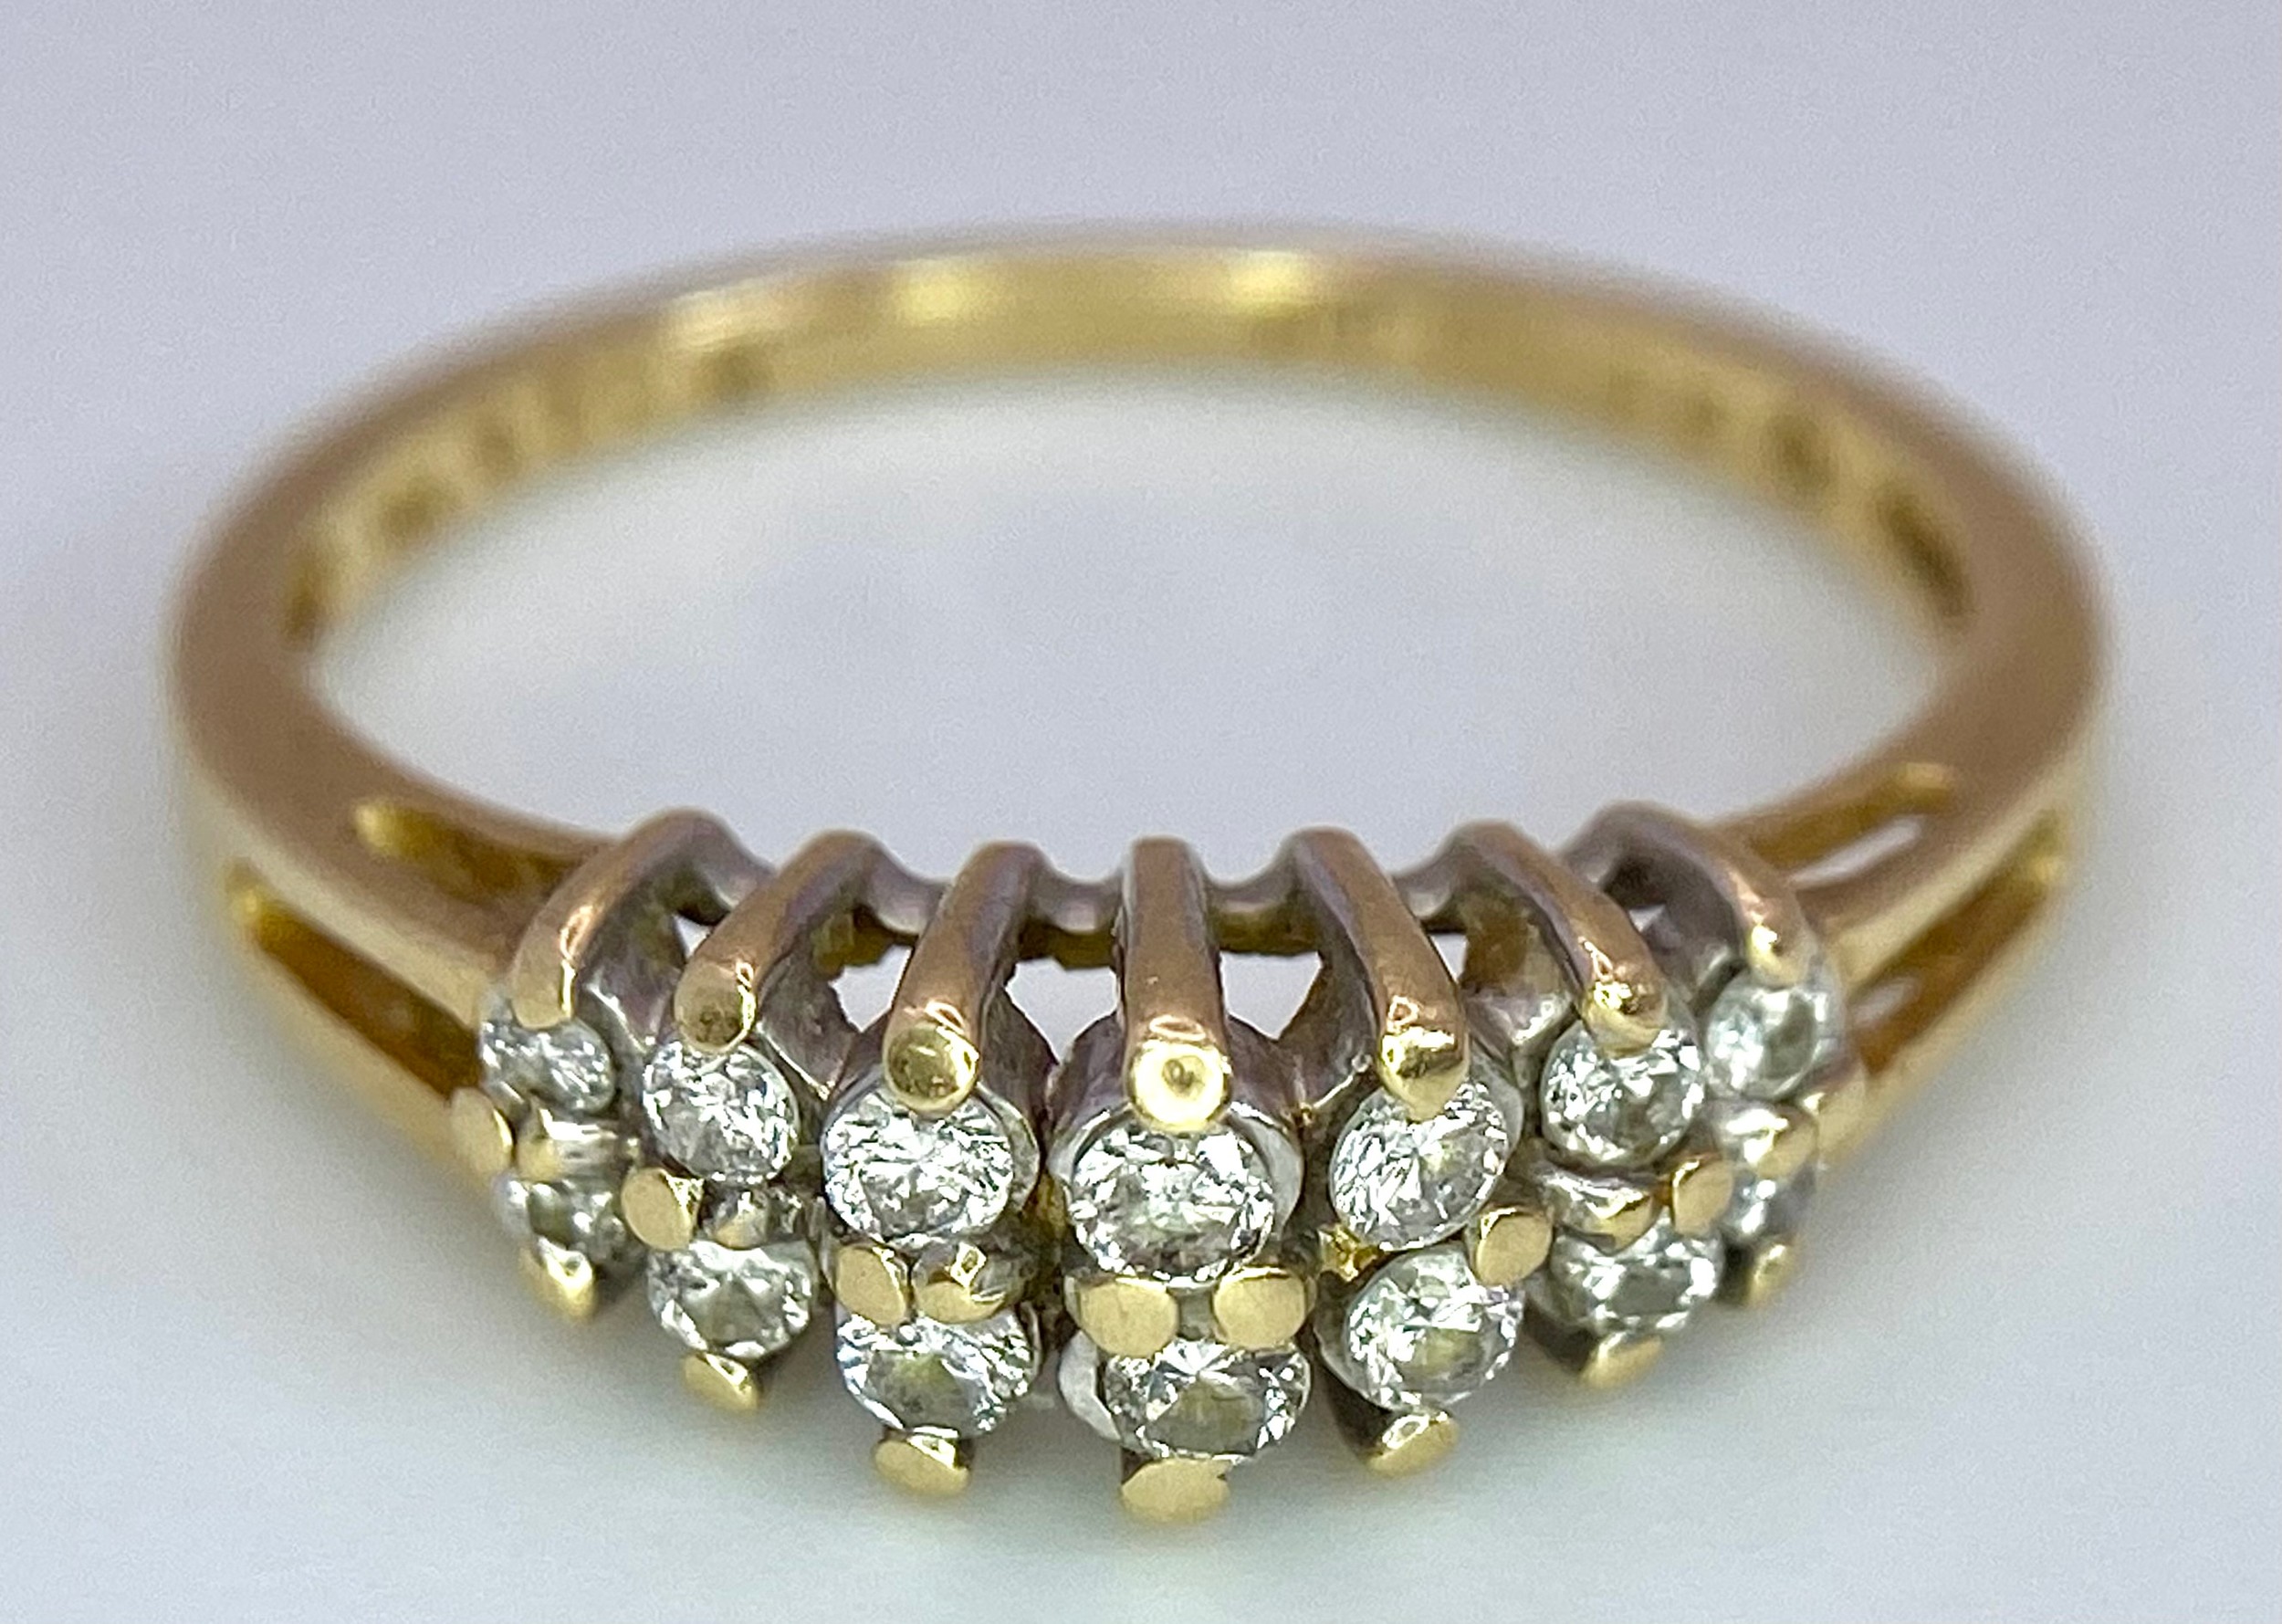 A 9K YELLOW GOLD DIAMOND BAND RING 3.1G SIZE P 1/2. SC 9067 - Image 4 of 7